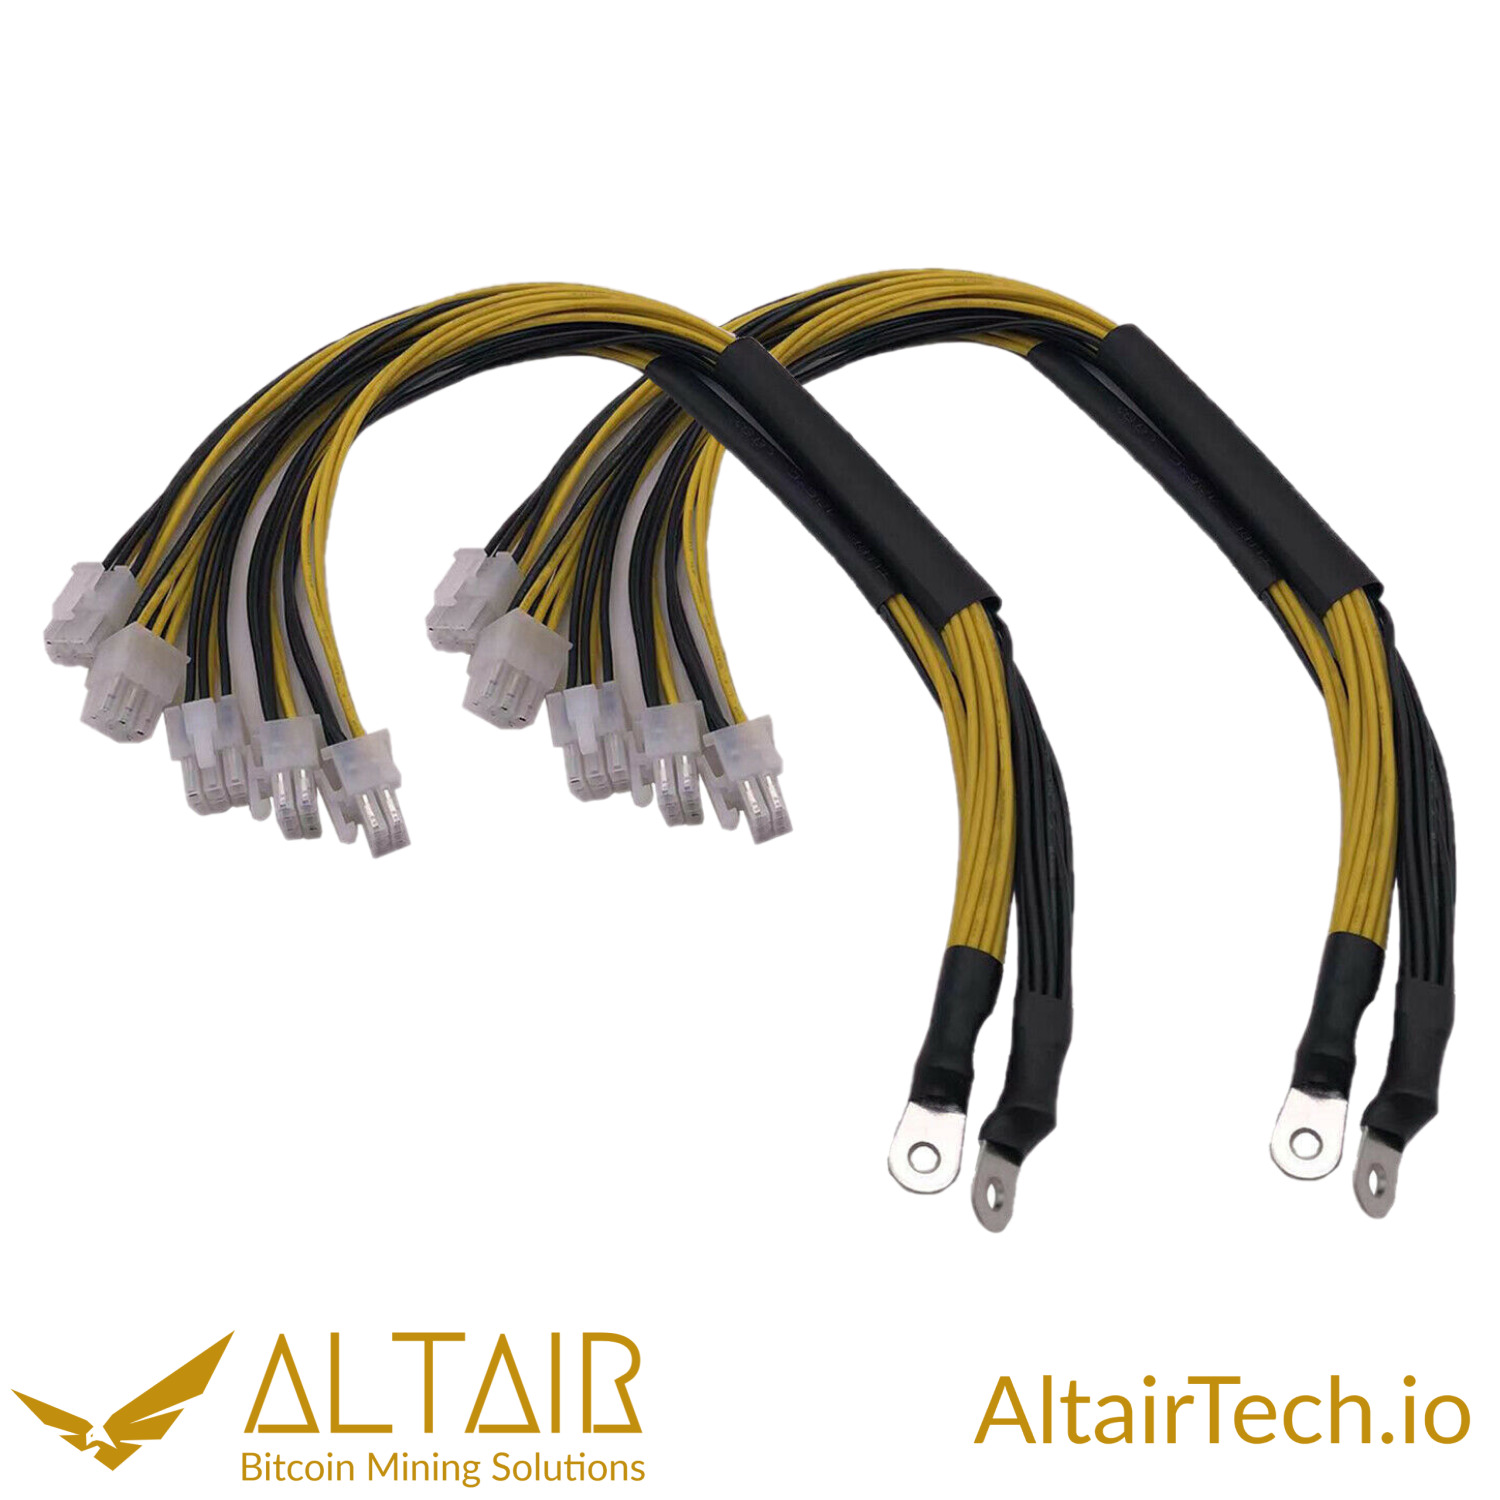 AltairTech.io APW7/APW3/APW3++ PSU Cables with 6 pin PCIe Connectors, fast ship